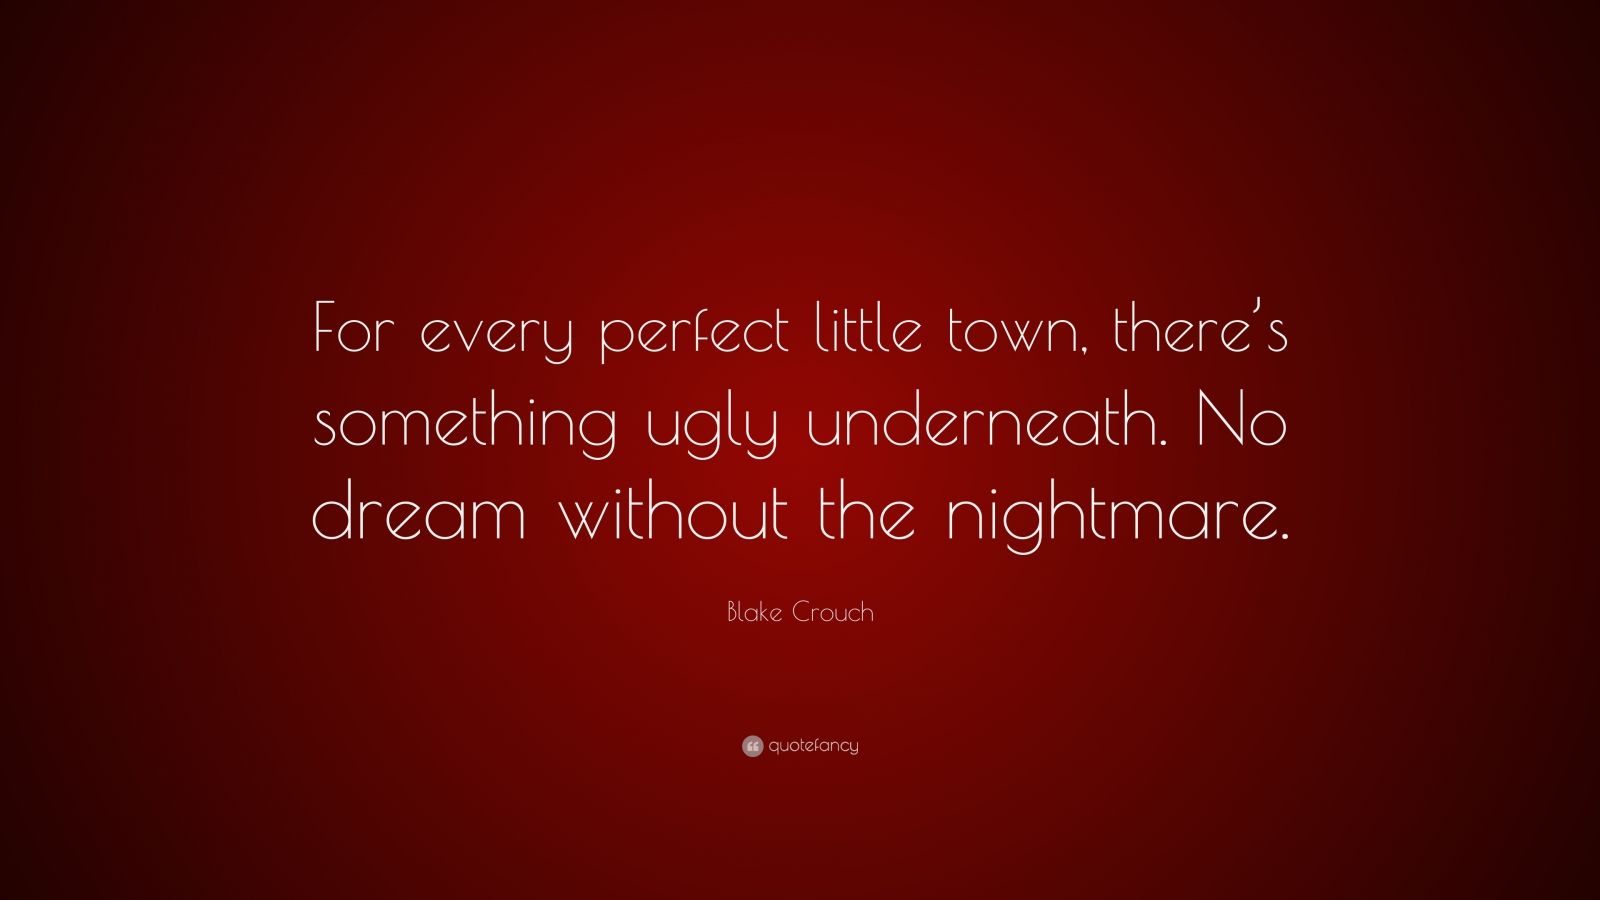 Blake Crouch Quote: “For every perfect little town, there’s something ...